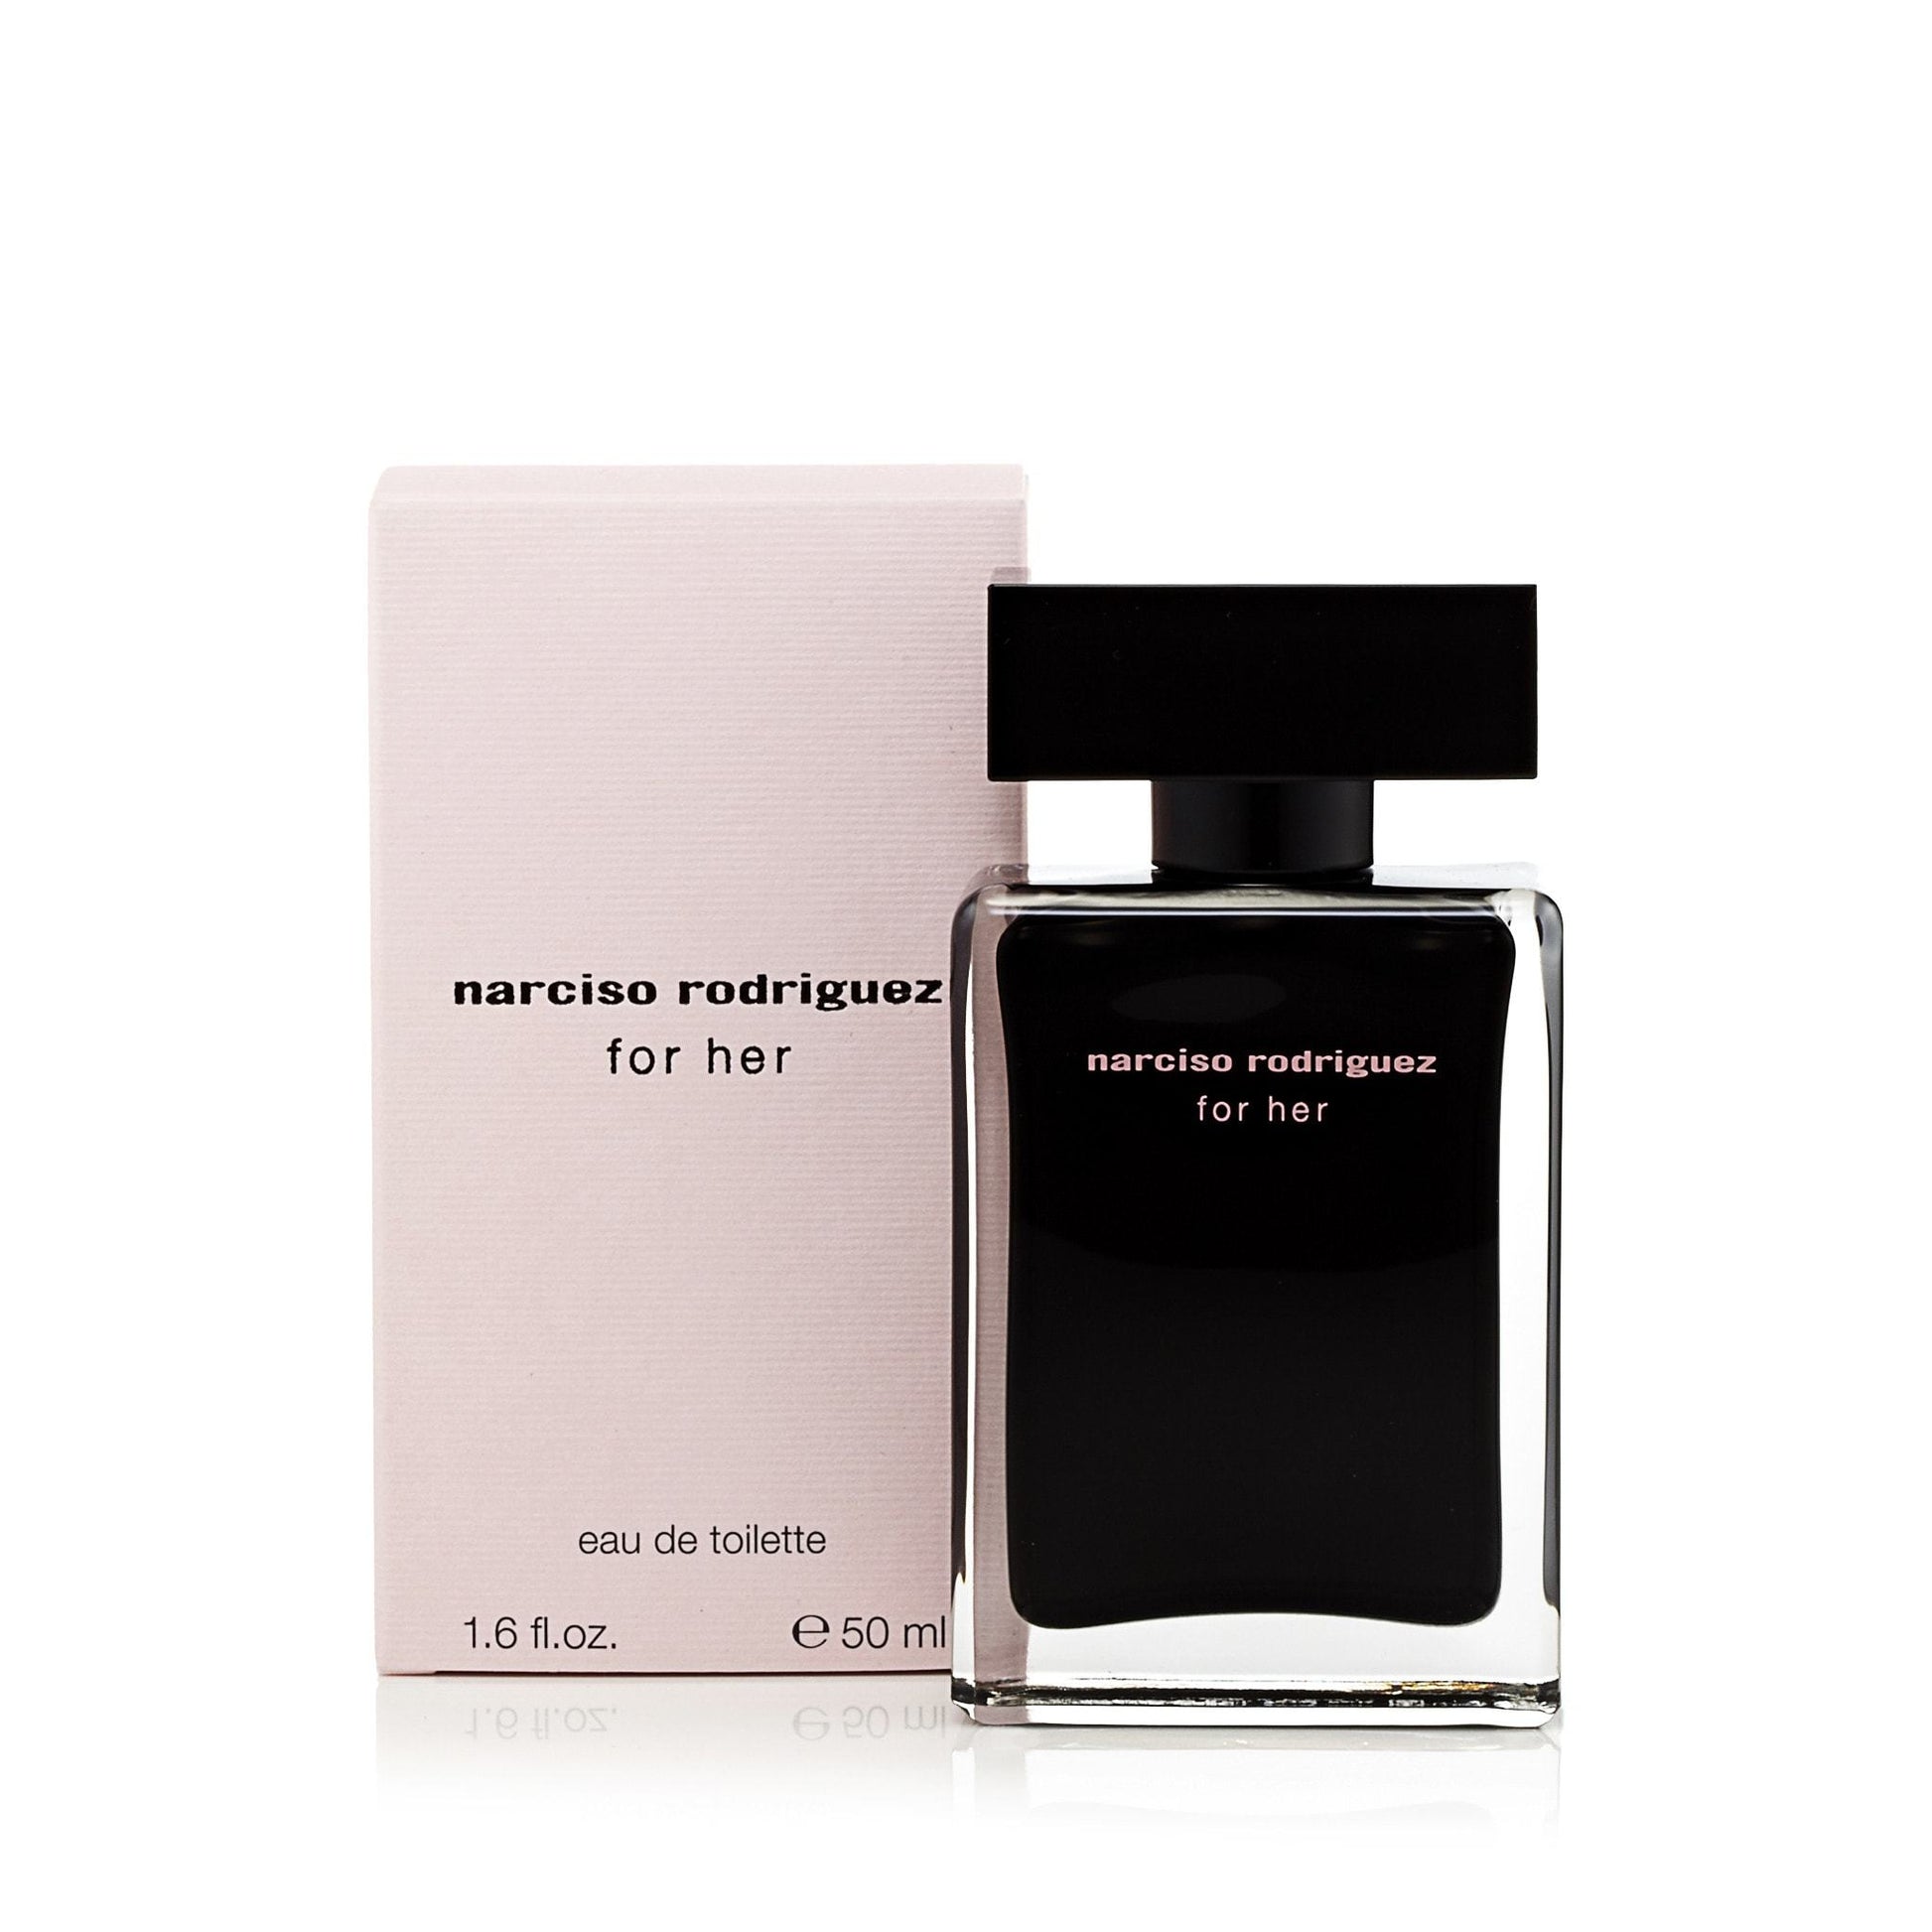 Narciso Rodriguez Eau de Toilette Spray for Women by Narciso Rodriguez, Product image 1